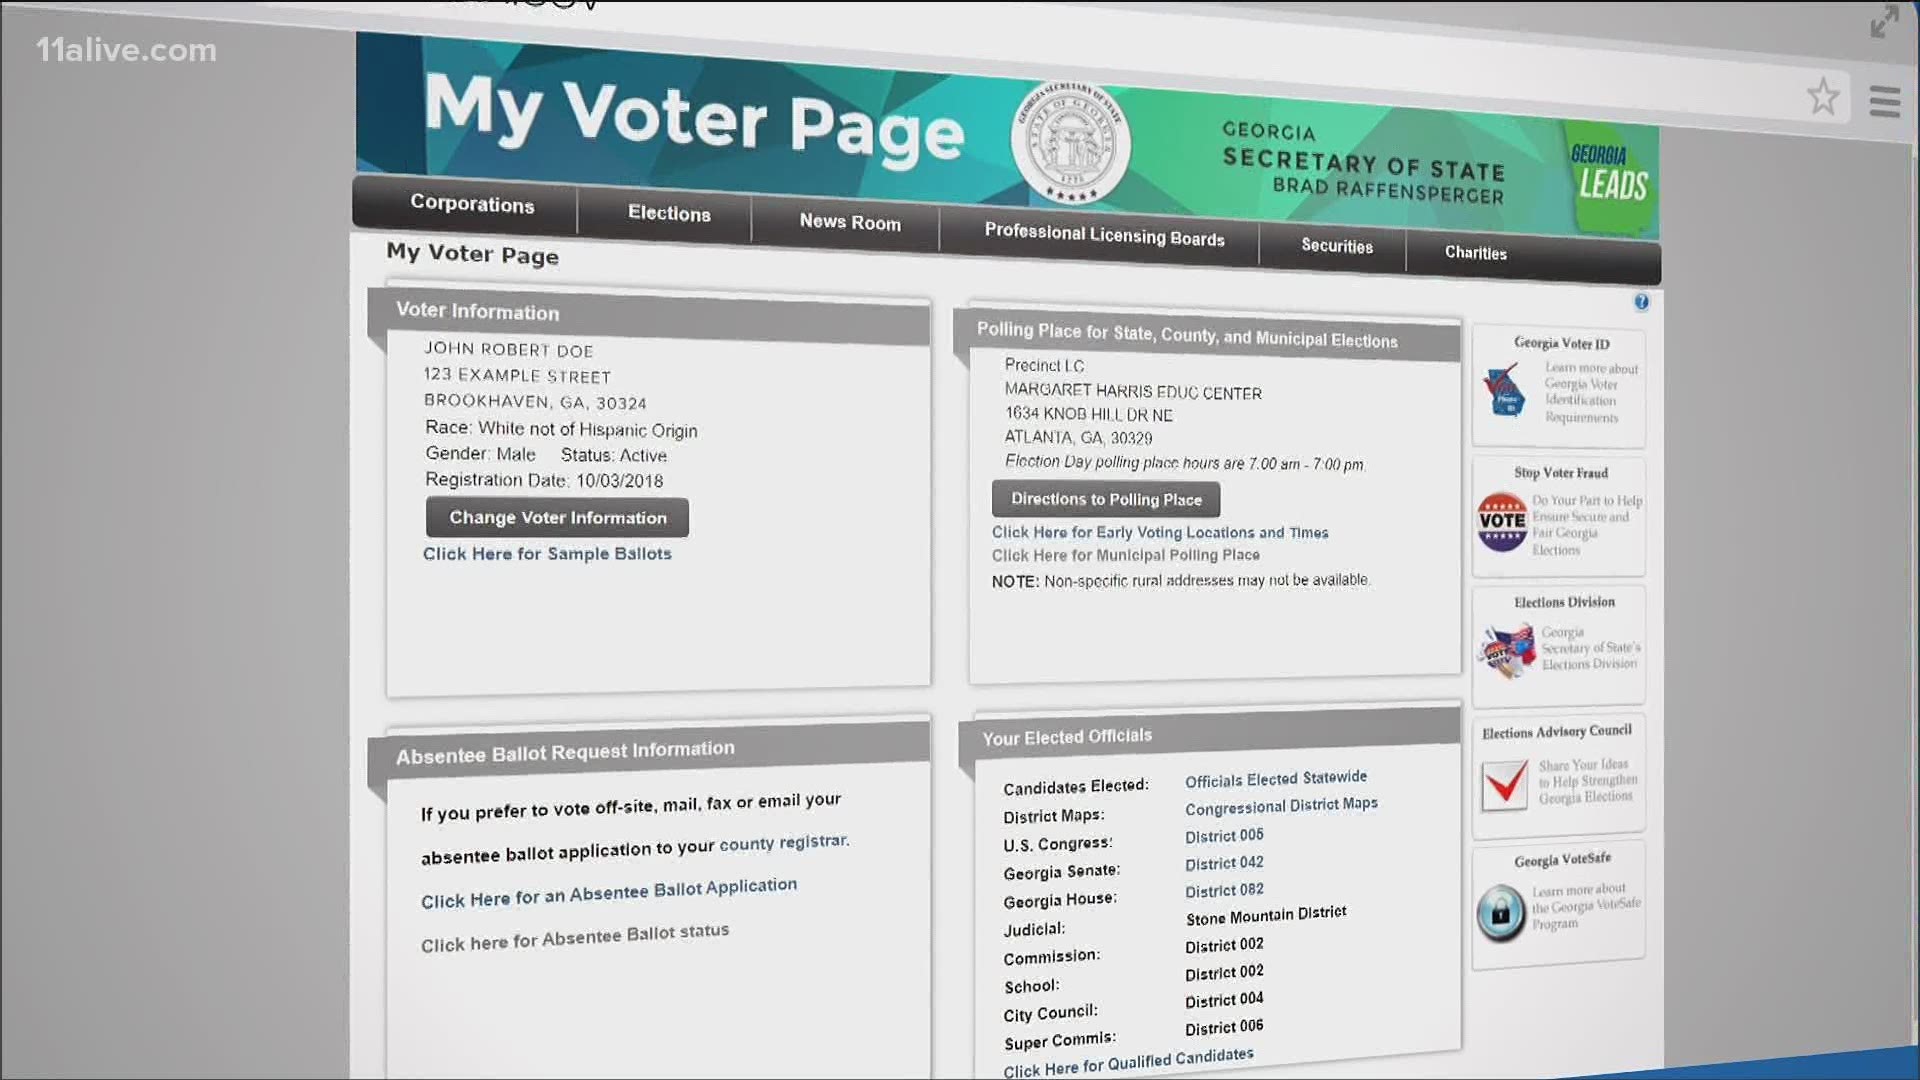 The state is urging everyone to check their registration status before Monday's deadline.